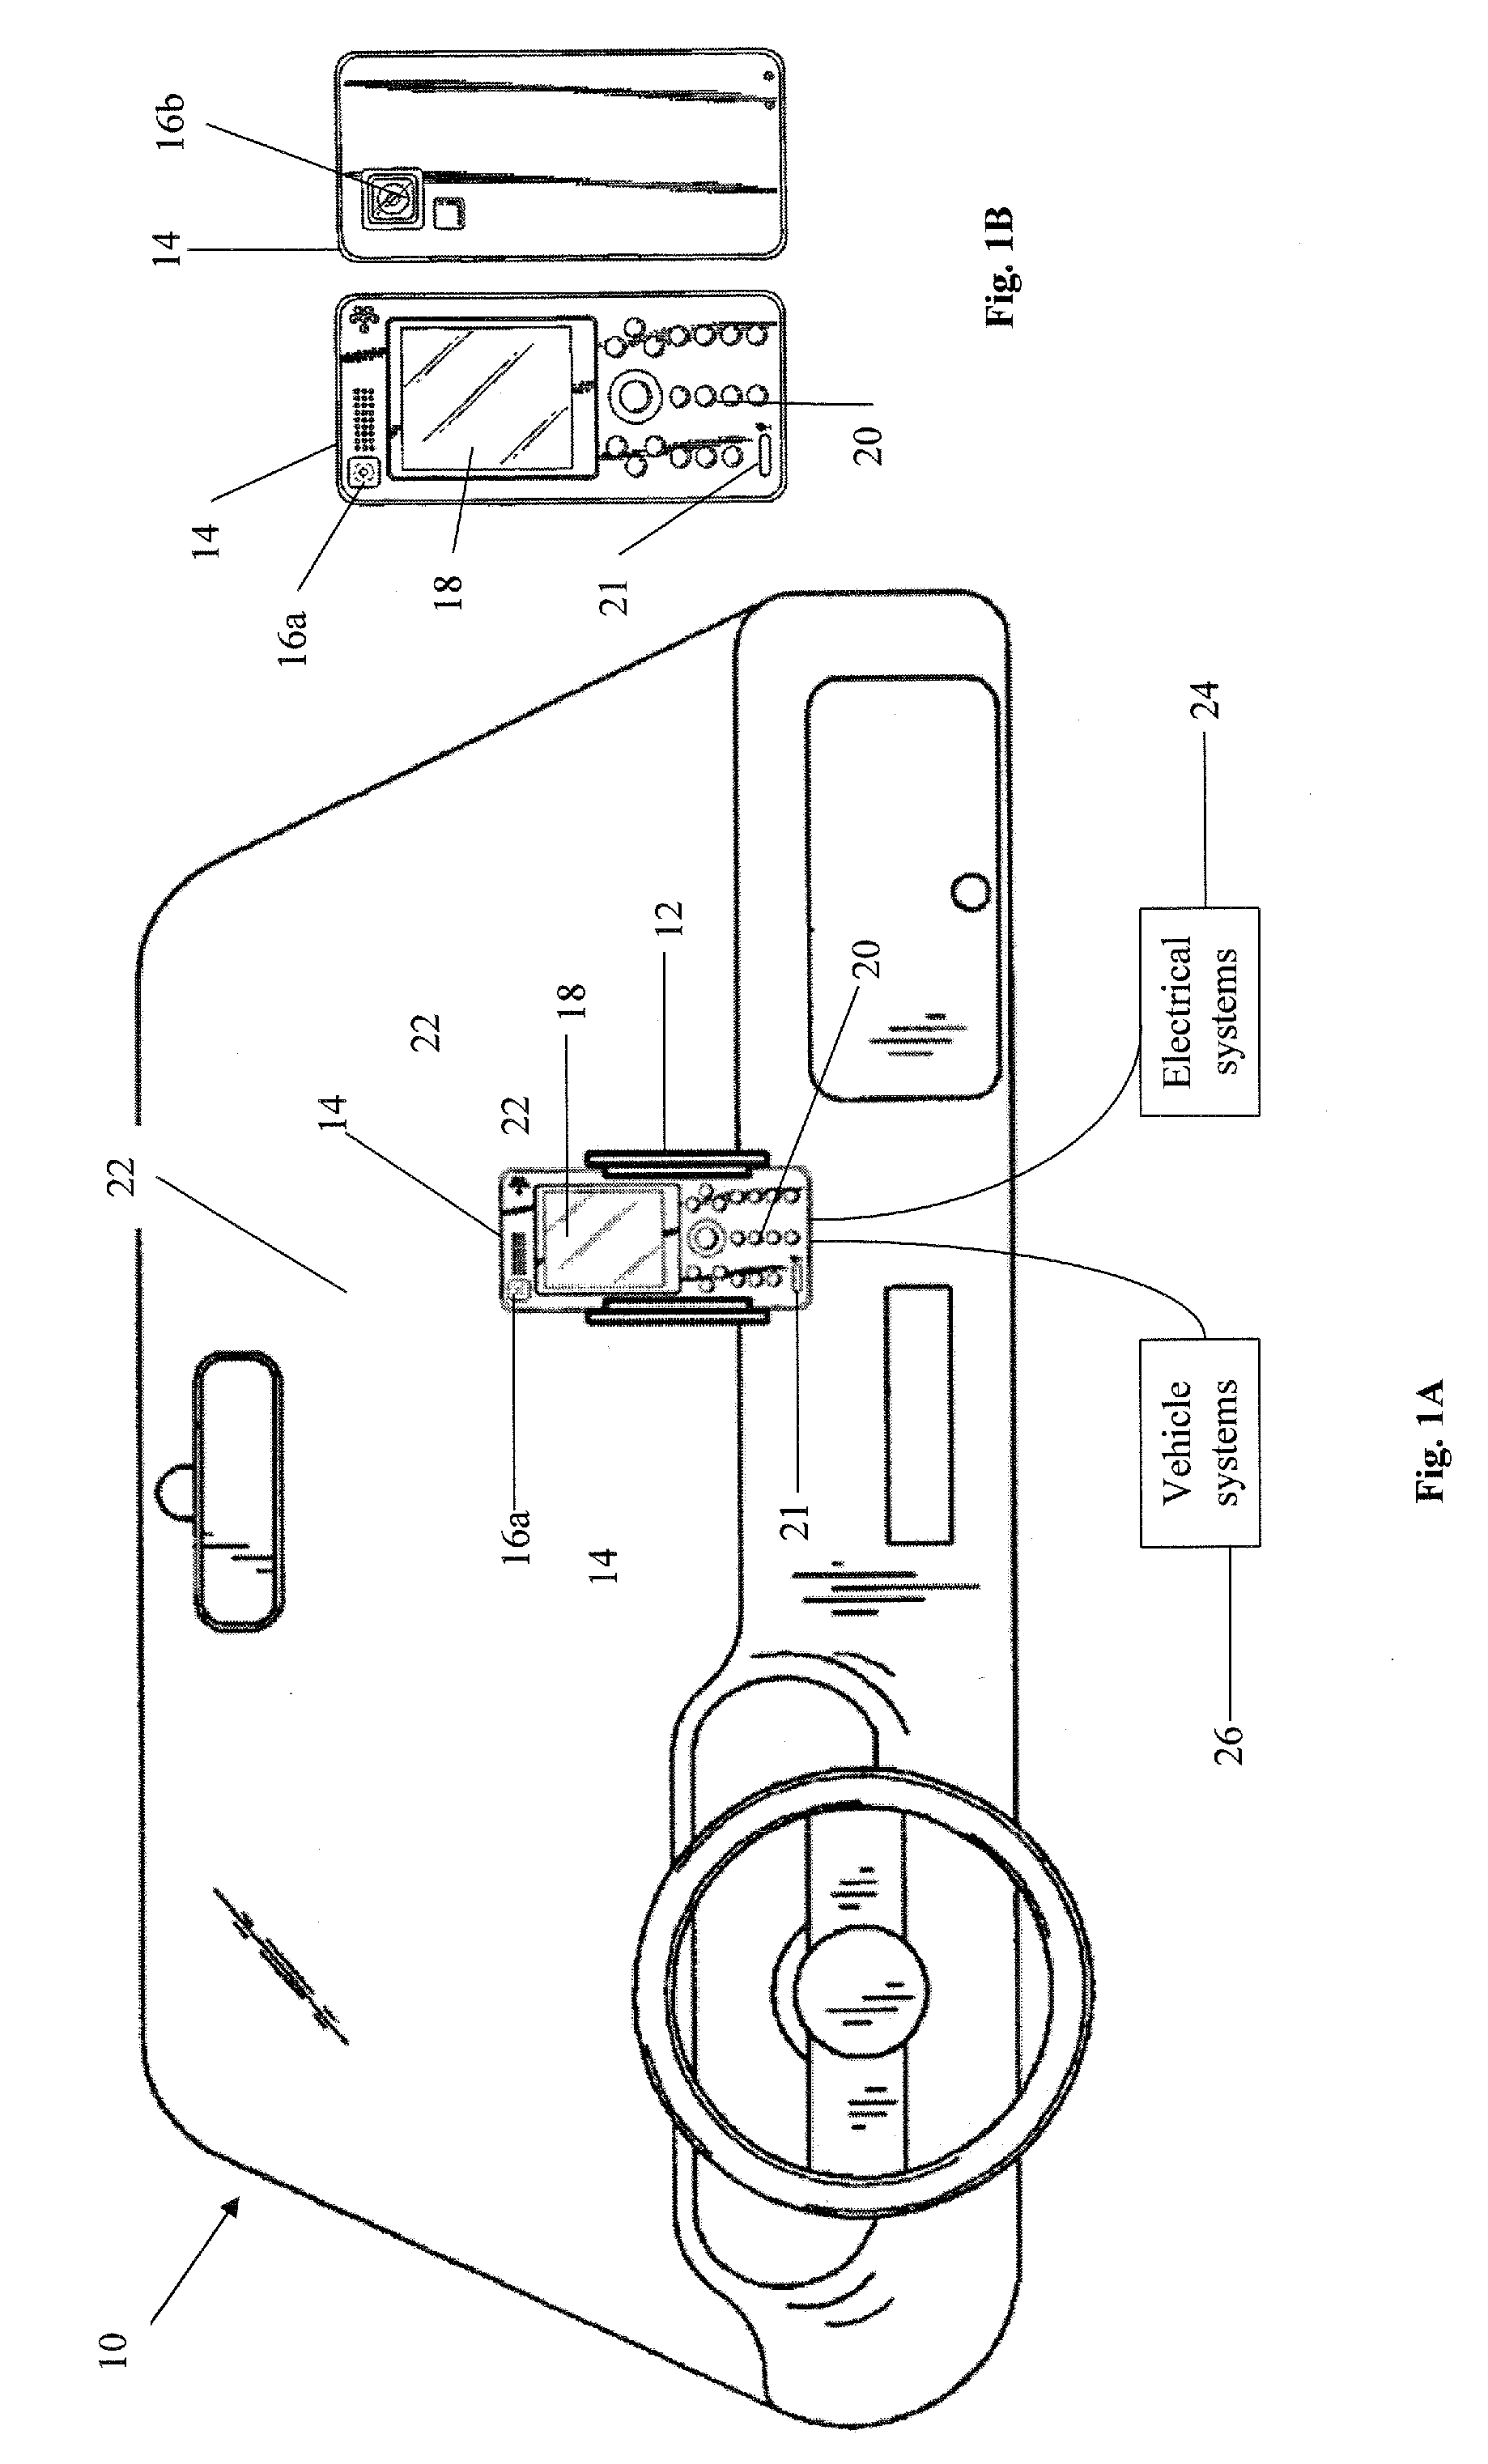 Device and method for handheld device based vehicle monitoring and driver assistance